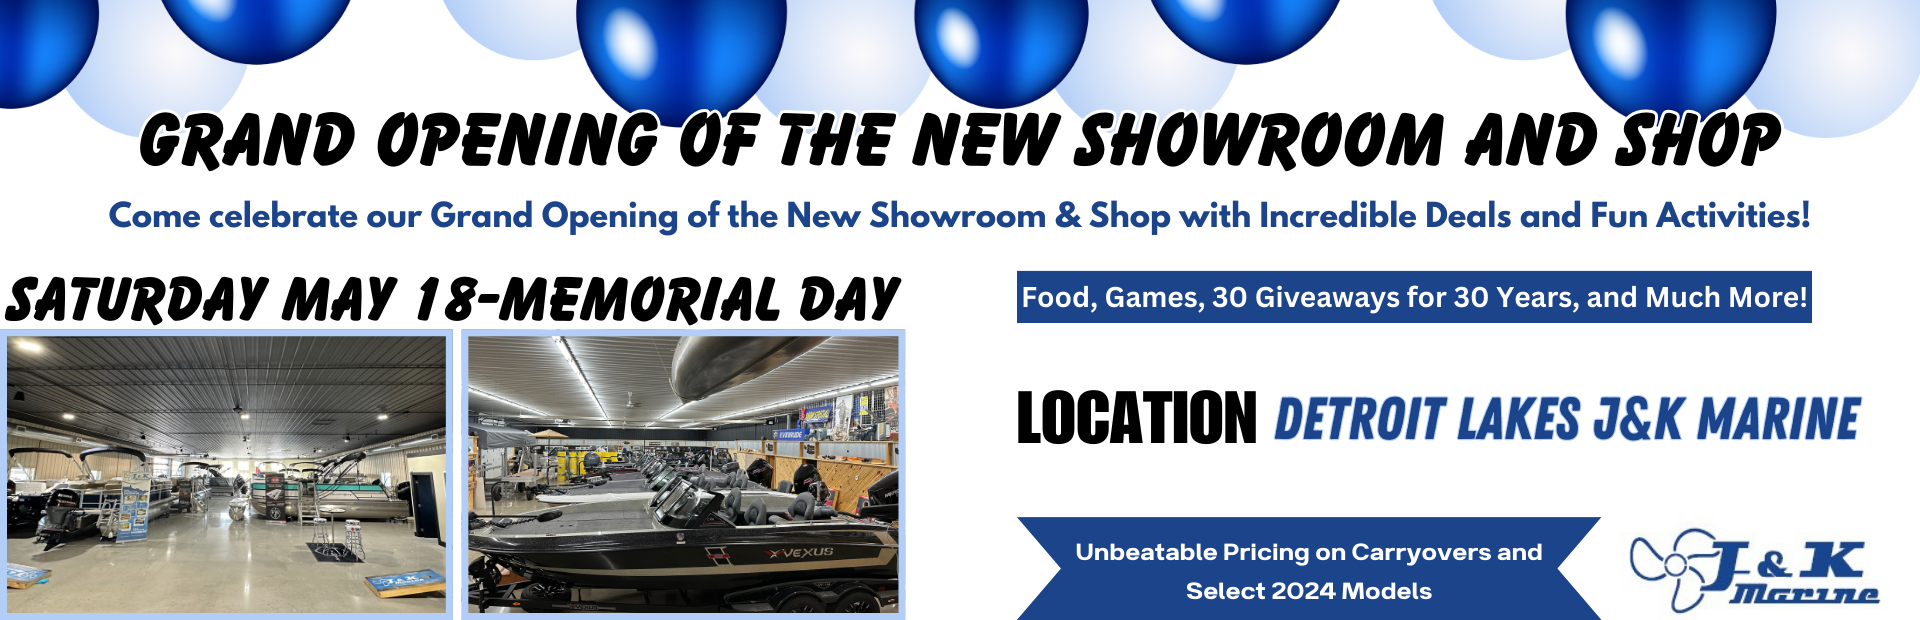 Grand Opening Of The New Showroom And Shop